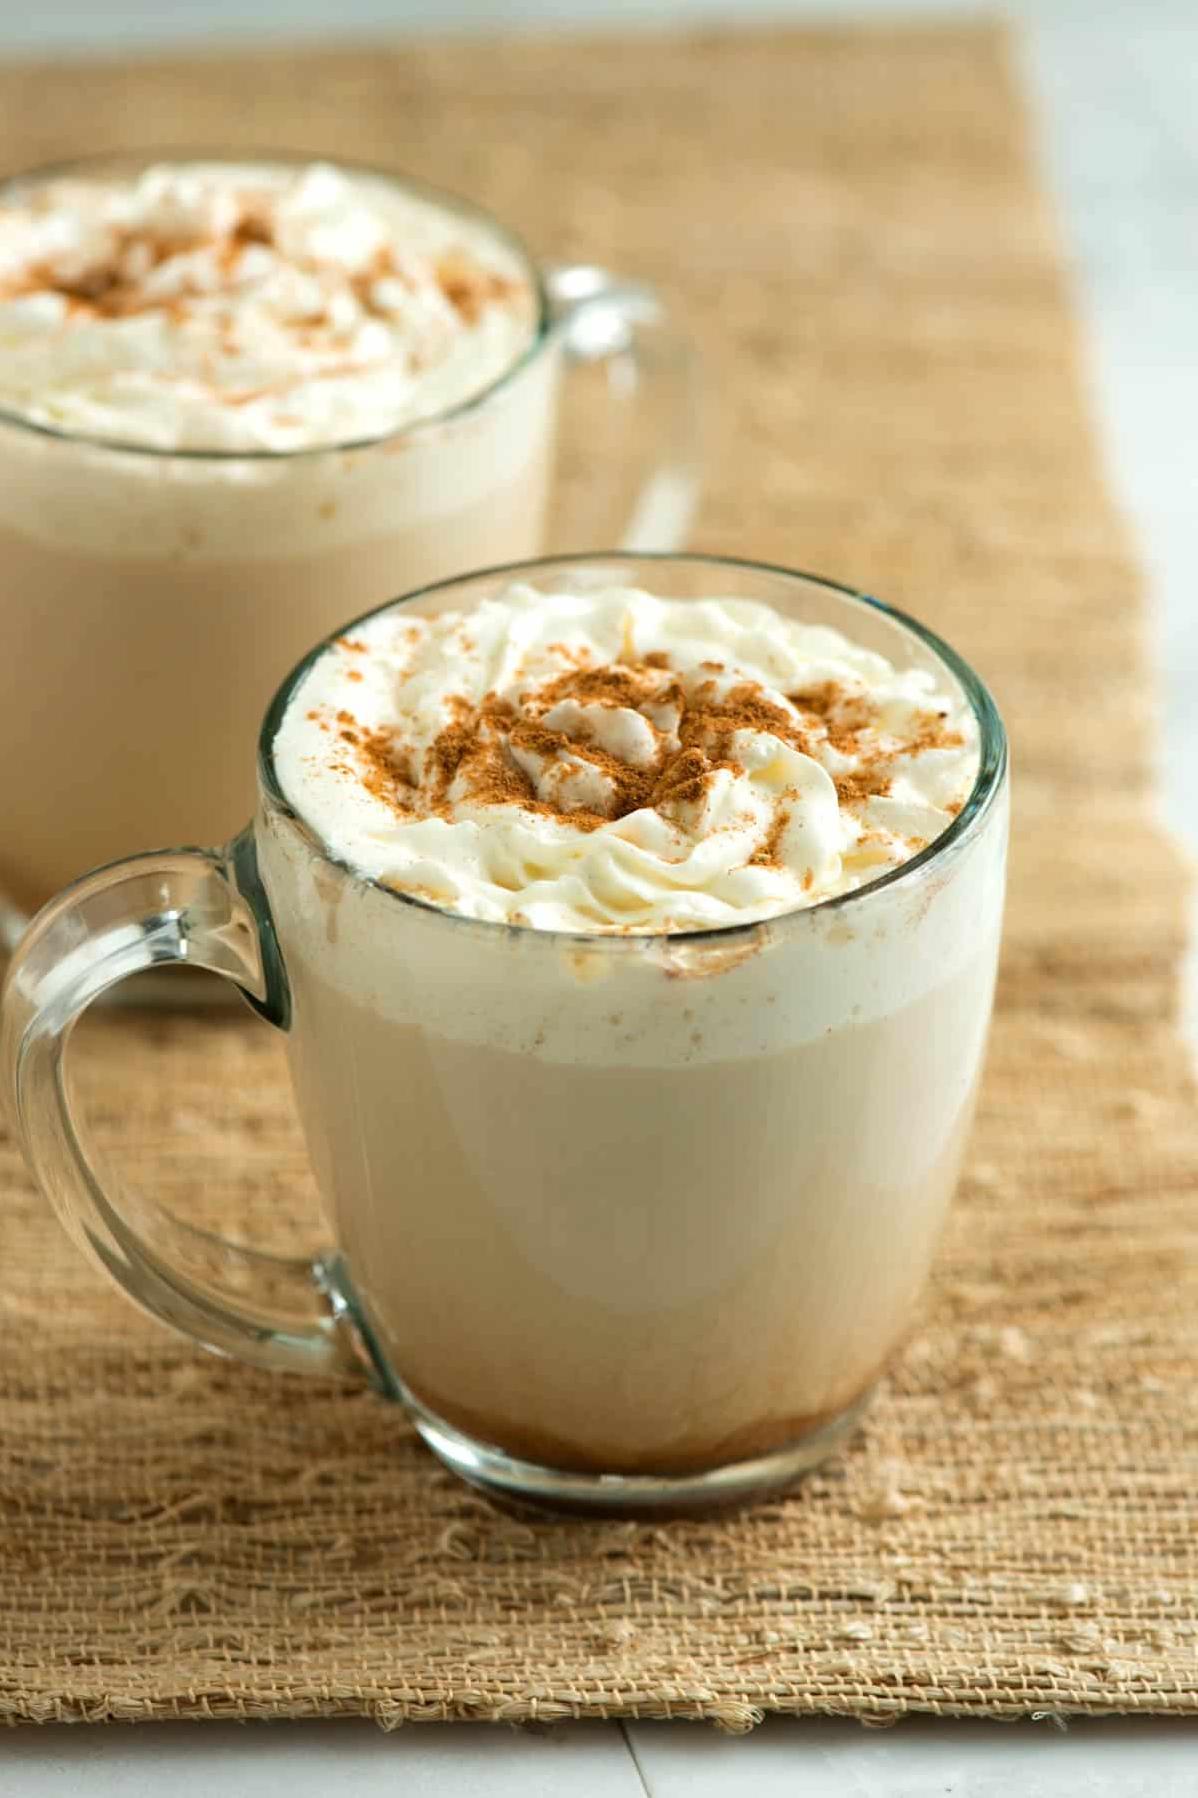  Fuel up with a festive flavor of pumpkin spice coffee.